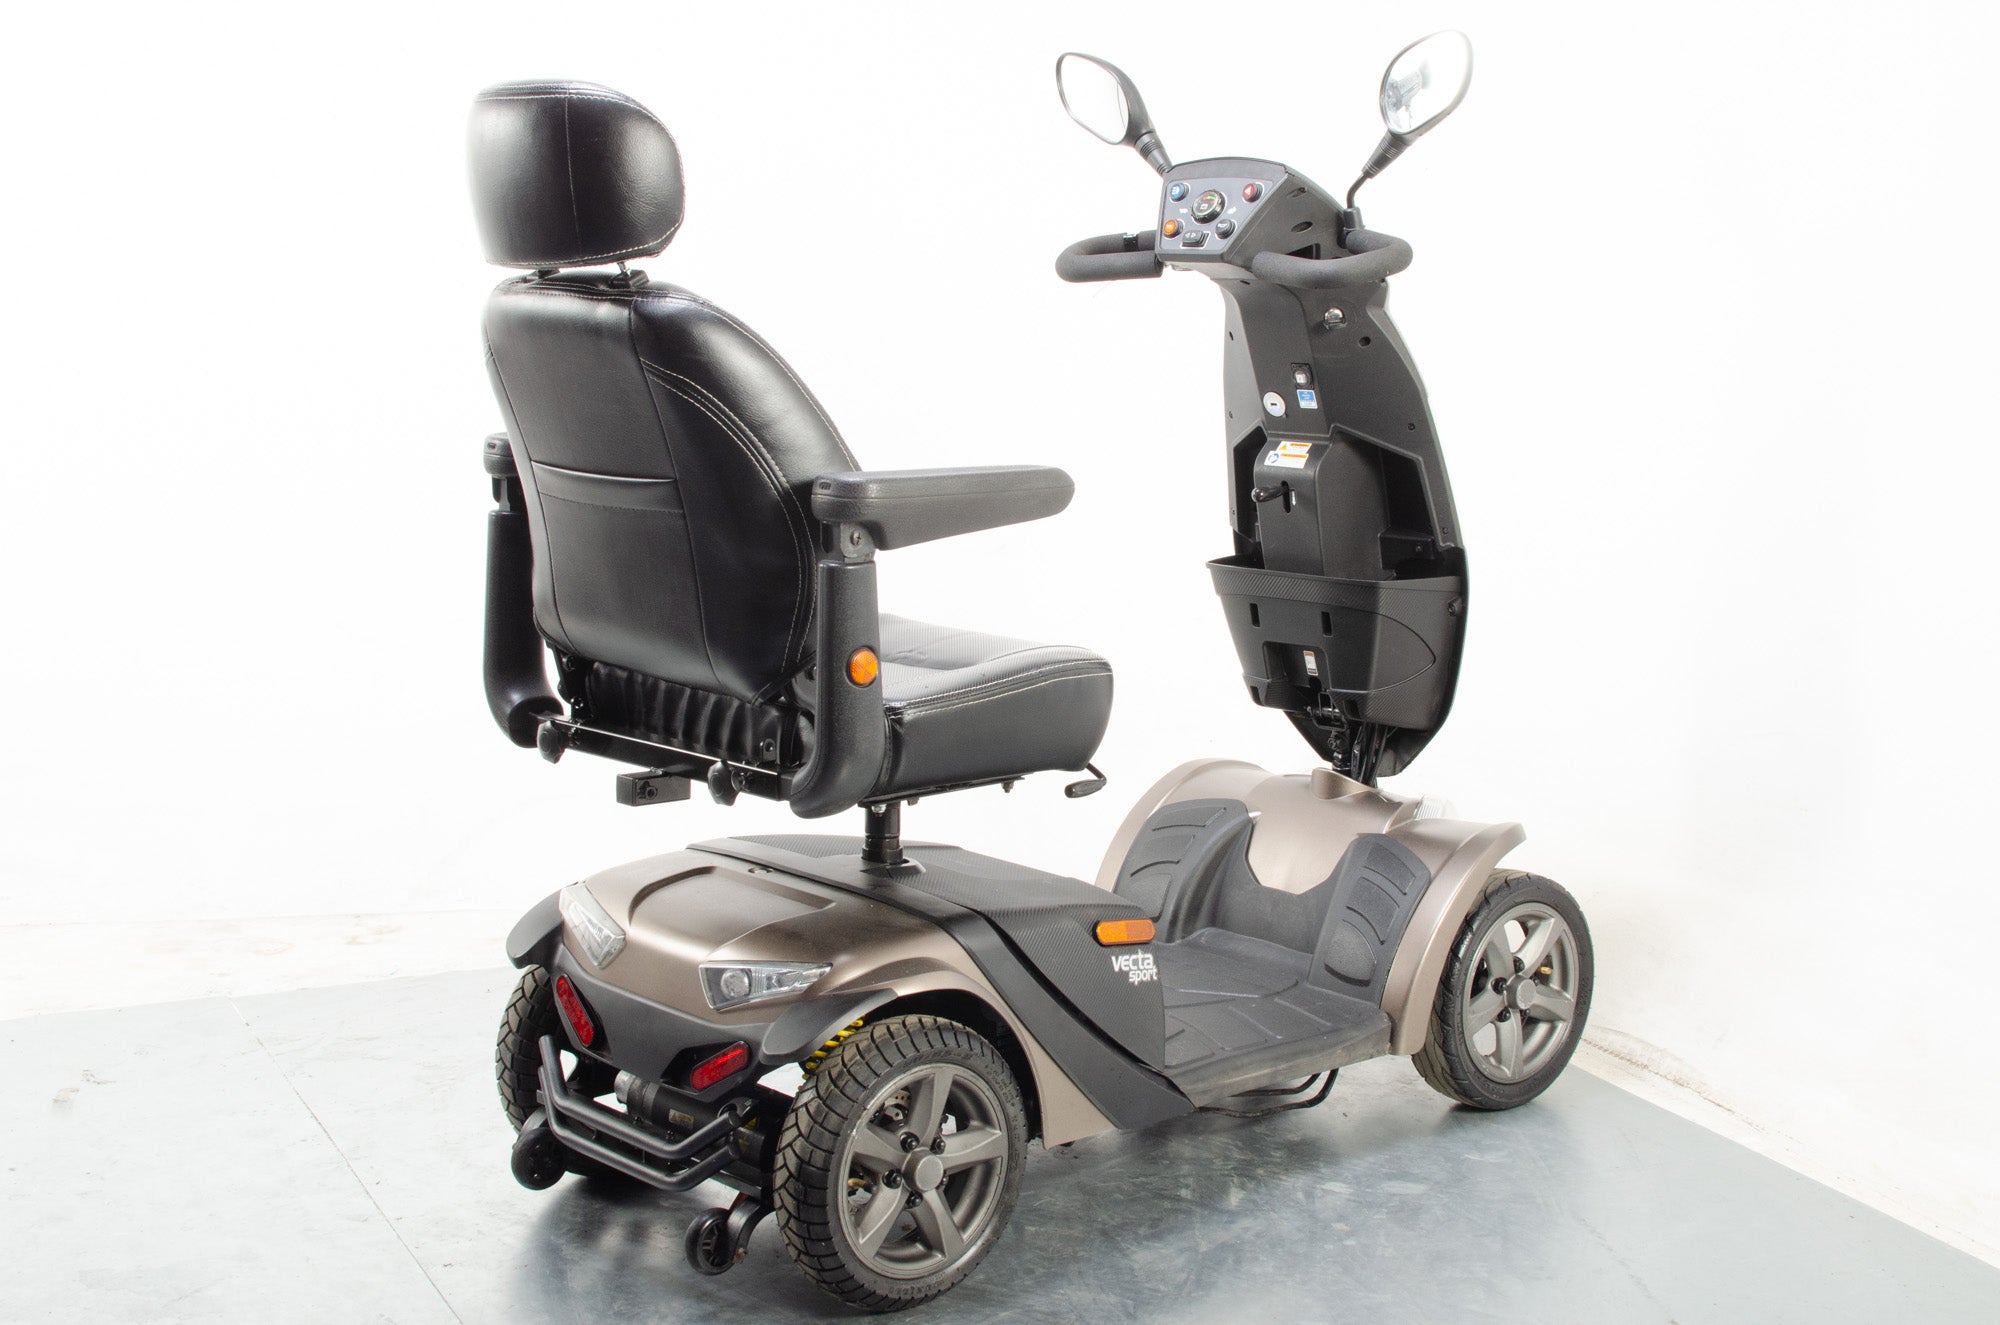 Rascal Vecta Sport Compact Used Electric Mobility Scooter 8mph LSD Suspension All-Terrain